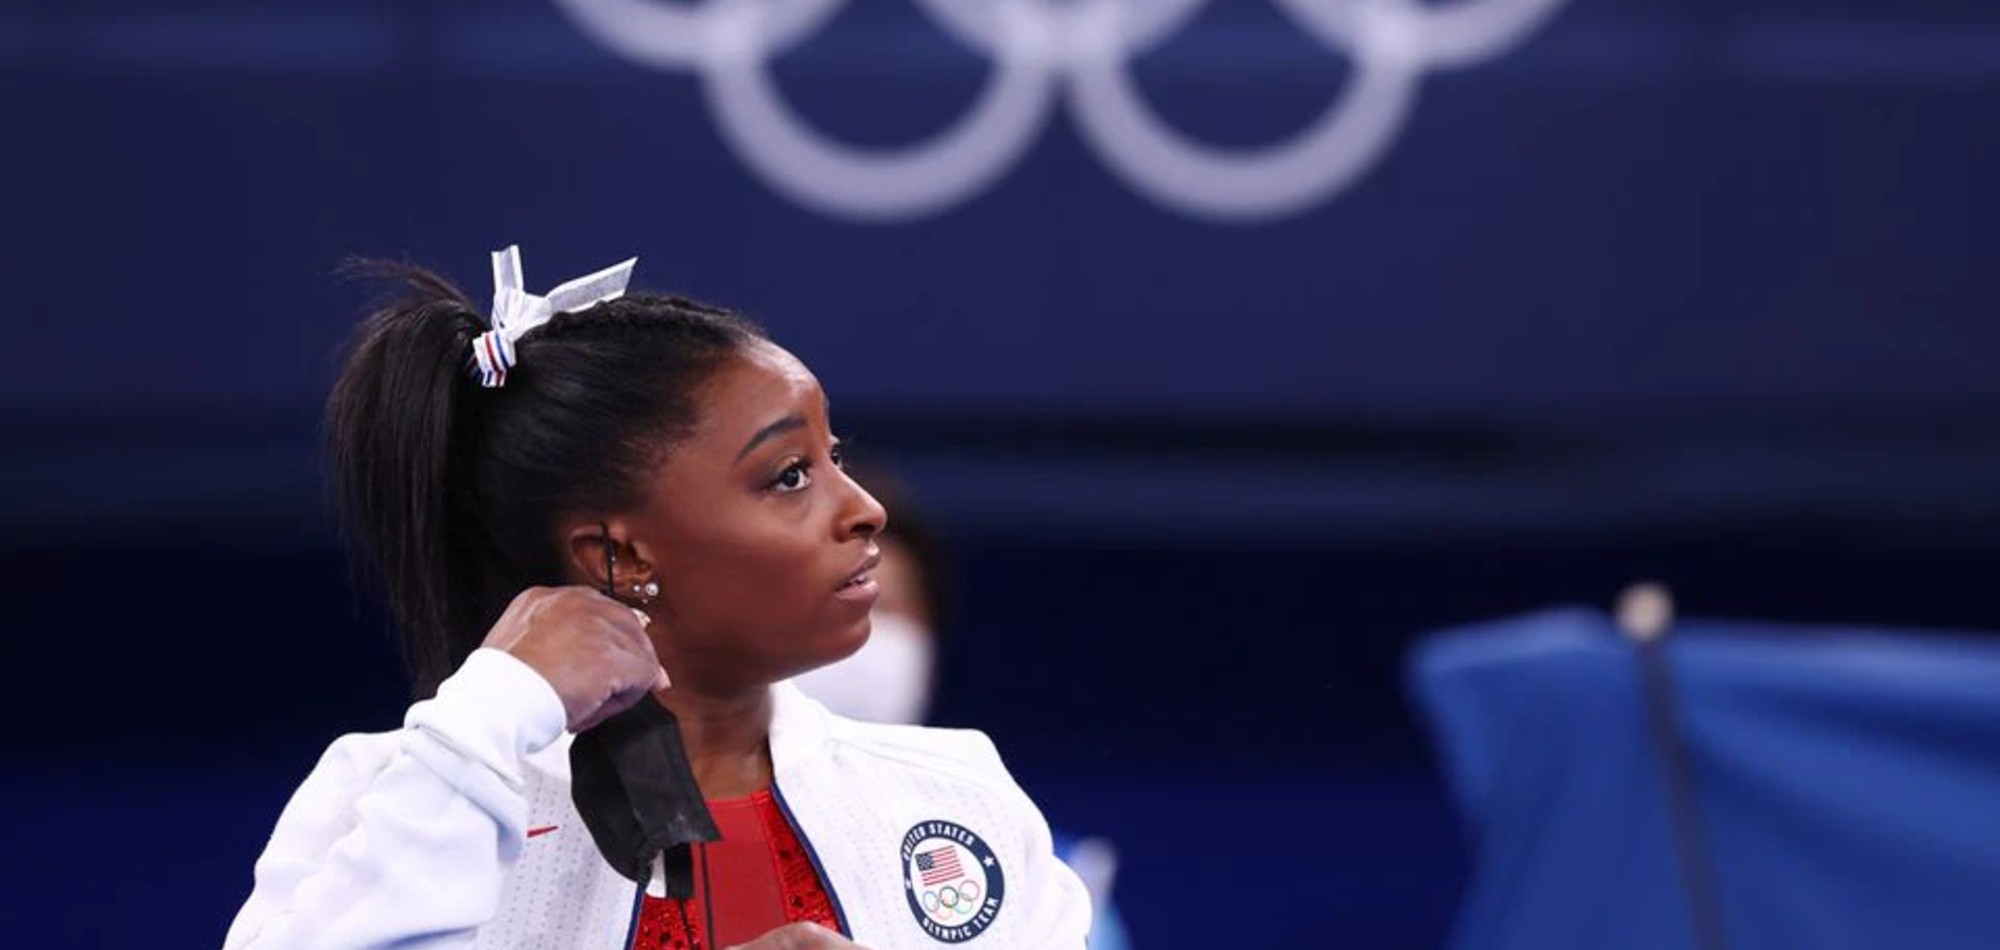 Biles uncertain to continue at Tokyo Olympics